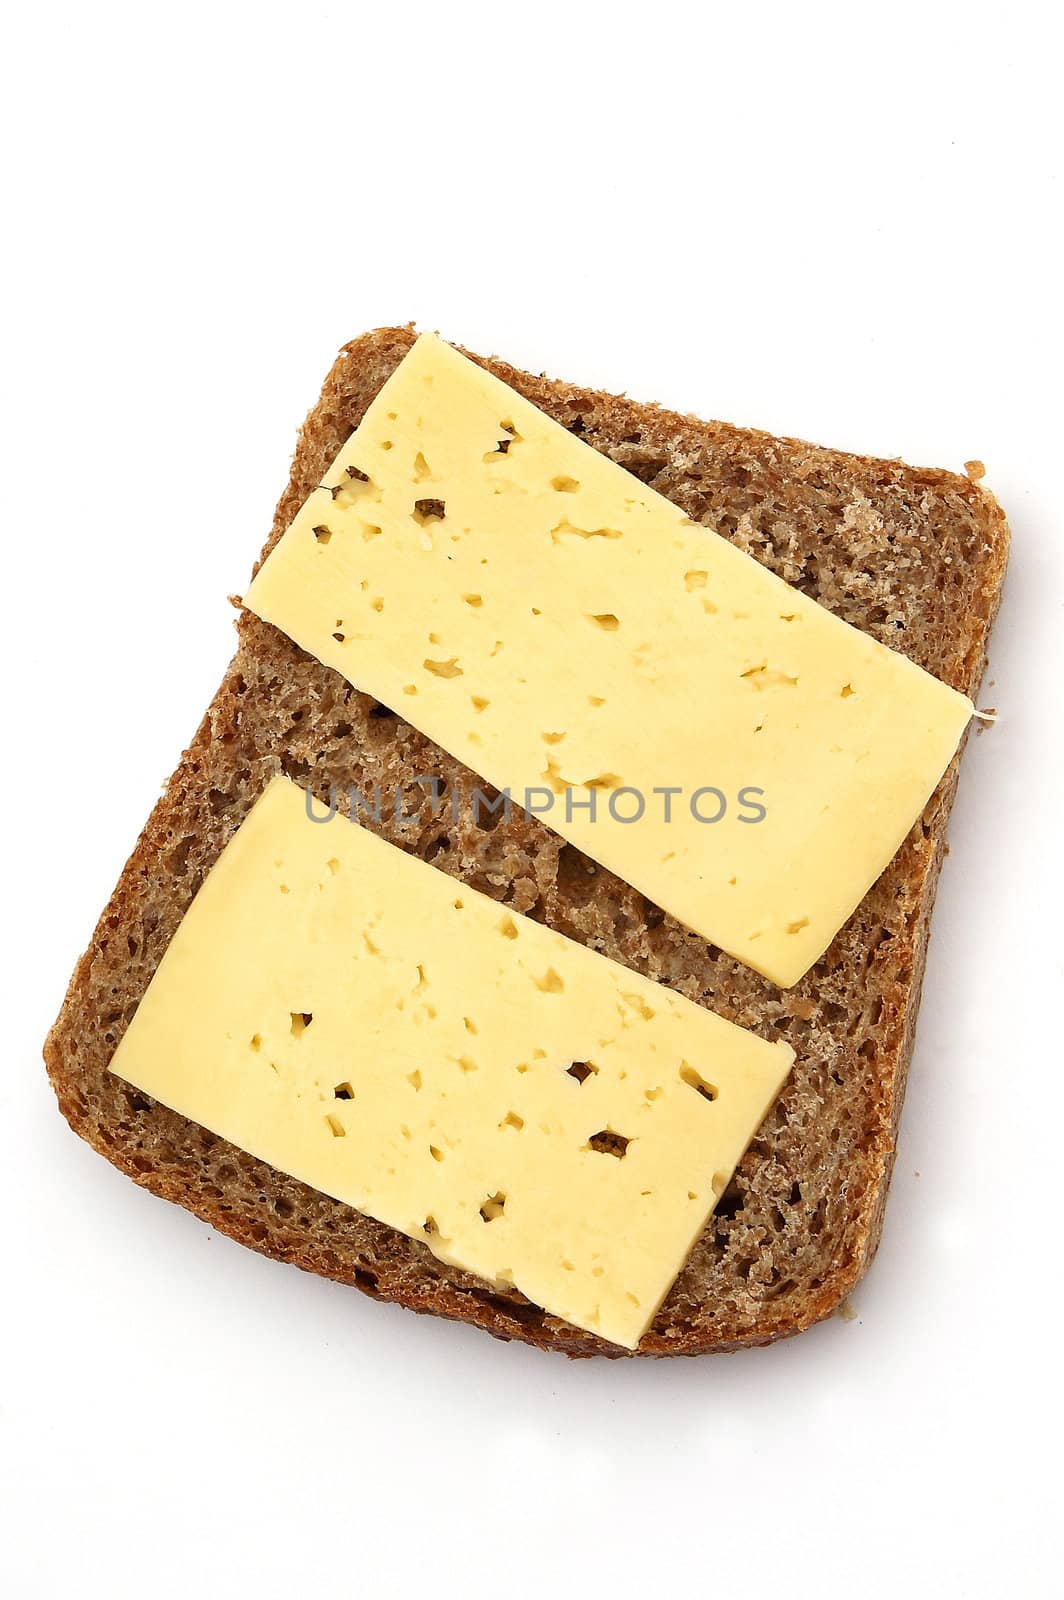 Some bread&cheese on the white background